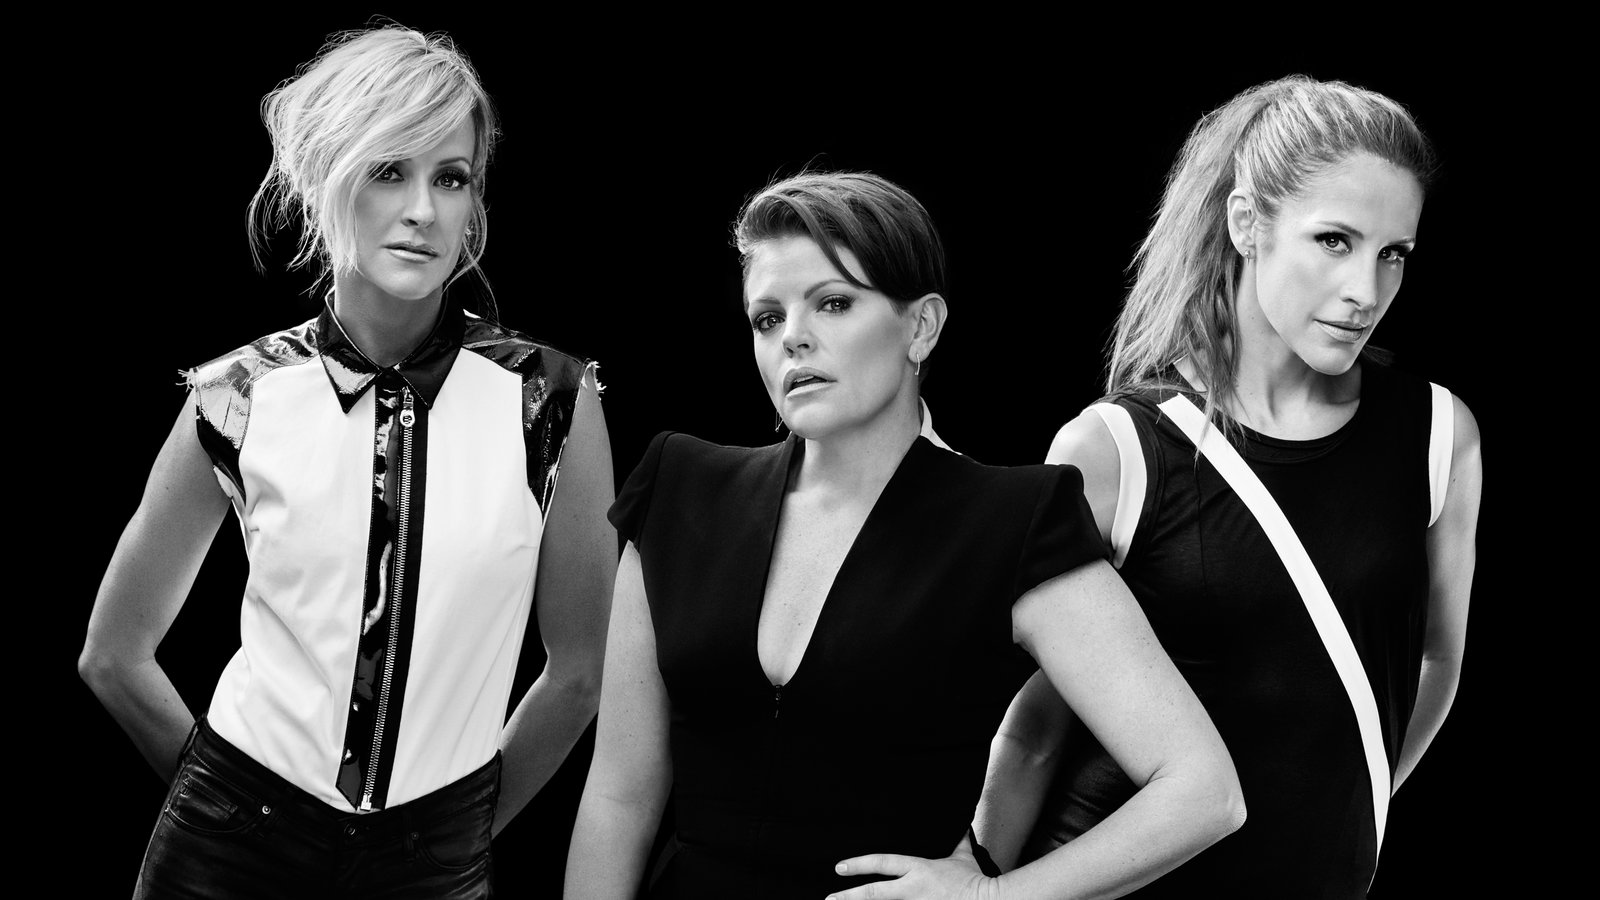 Dixie Chicks. They were against the 2003 invasion of Iraq, and publicly said so. They were effectively cancelled by the right as a result. Turns out they were correct, there were no weapons of mass destruction. The invasion was concocted so Bush could be seen as striking back for 9/11, which won him re-election in 2004. u/dare978devil